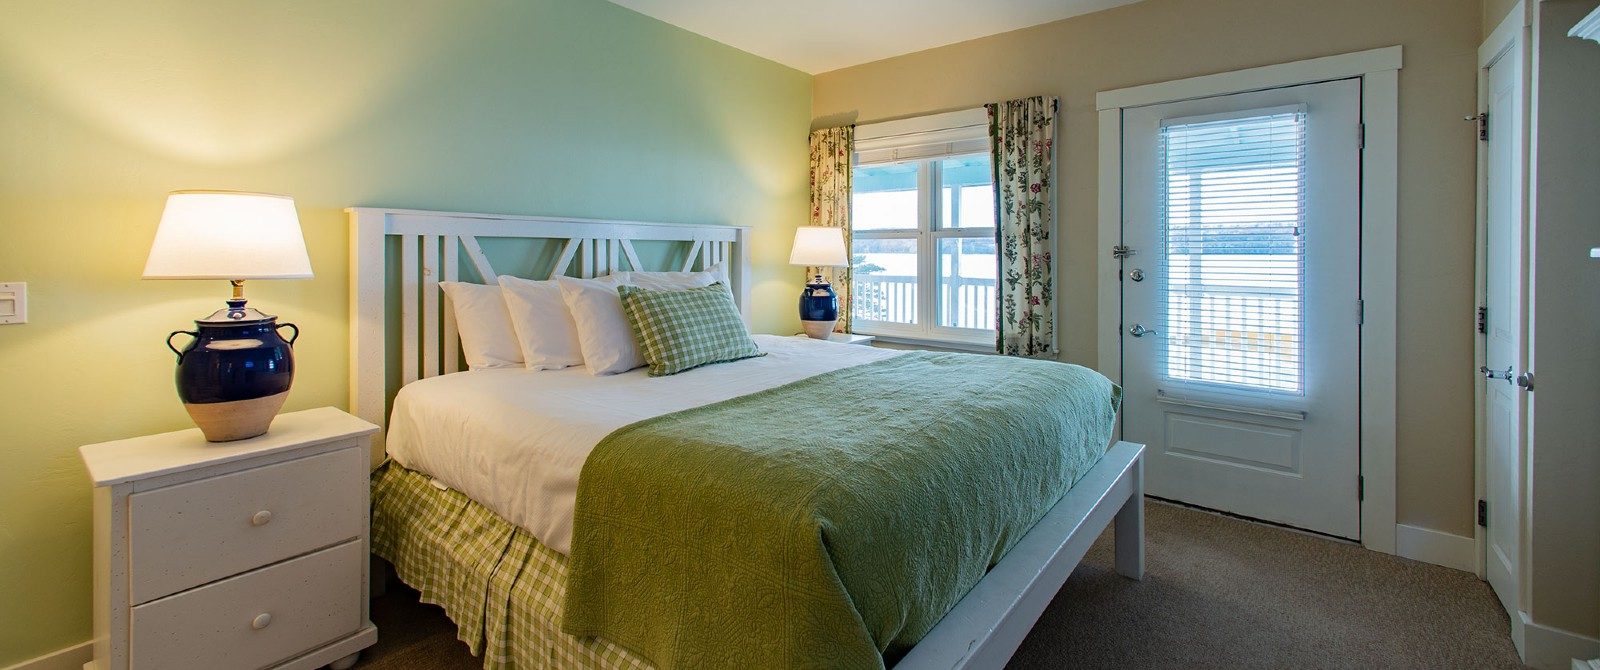 Bright bedroom with queen bed, side tables with lamps and window and door overlooking the water